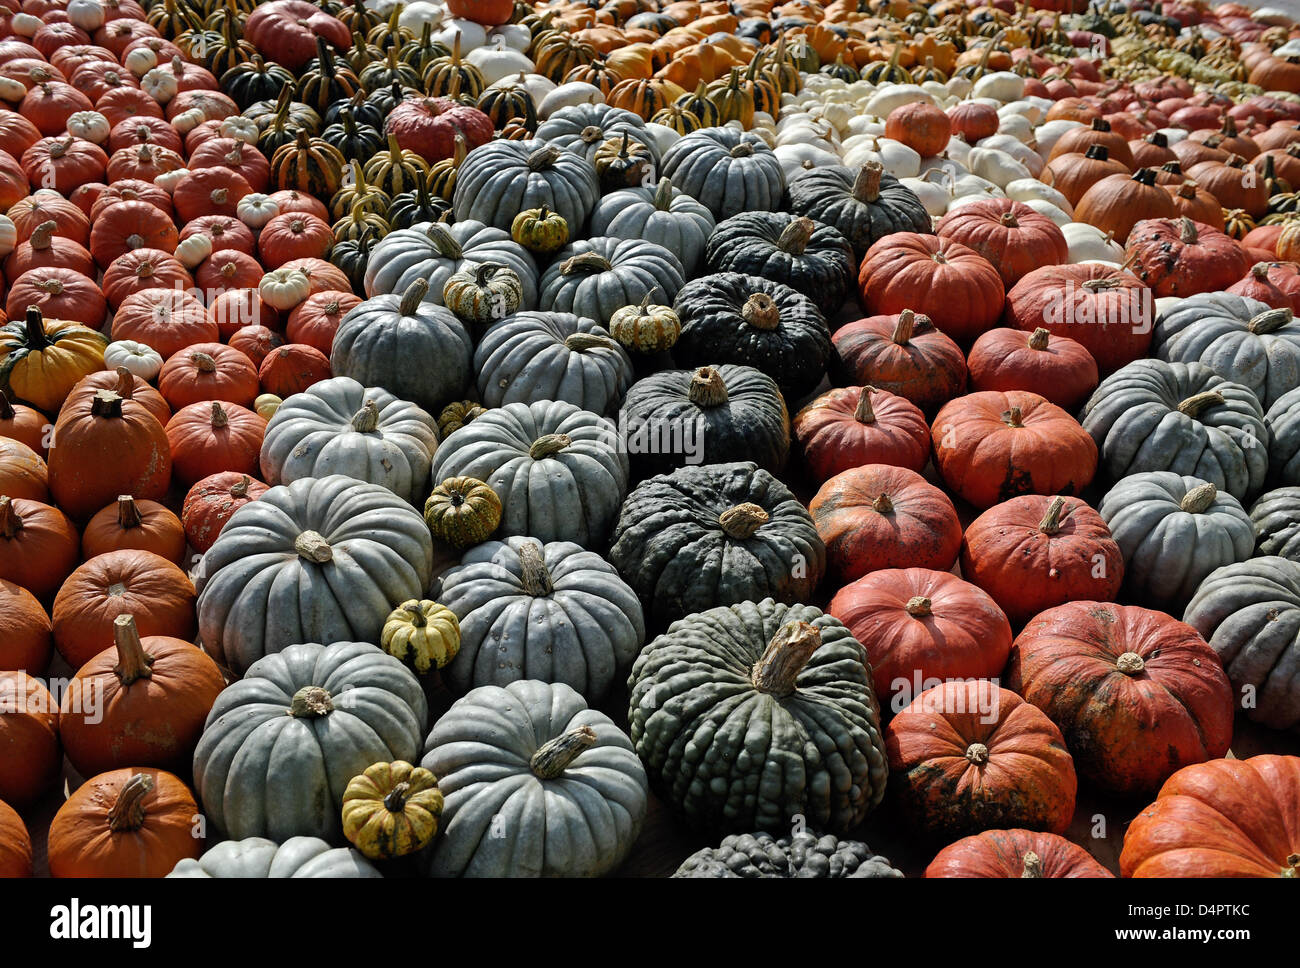 Various types of pumpkins on display at a pumpkin sculpture exhibition at Holiday Park in Hassloch, Germany, 01 September 2009. The theme park stages an exhibition of pumpkin sculptures from 01 September to 01 November 2009. Fifty tons of 80 pumpkin varieties were used. Photo: RONLAD WITTEK Stock Photo